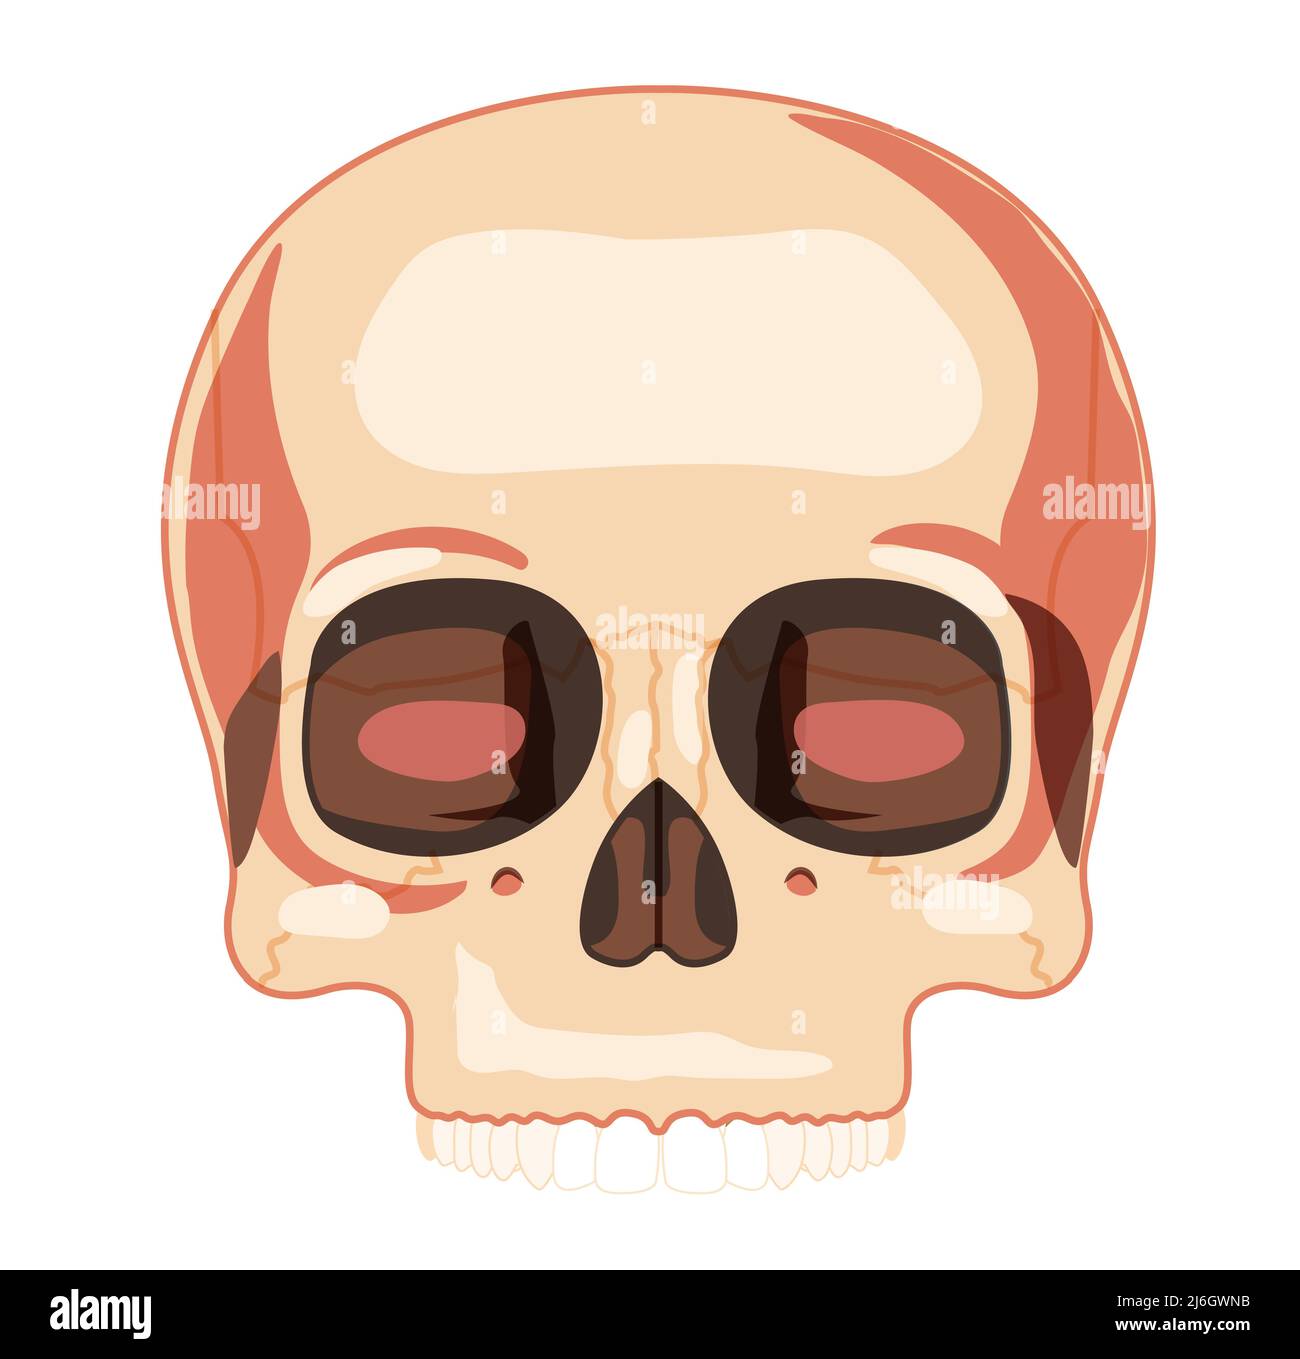 Skull Skeleton Human head front view with teeth row. Human face upper part model. Set of chump realistic flat natural color concept. Vector illustration of 3d anatomy isolated on white background Stock Vector